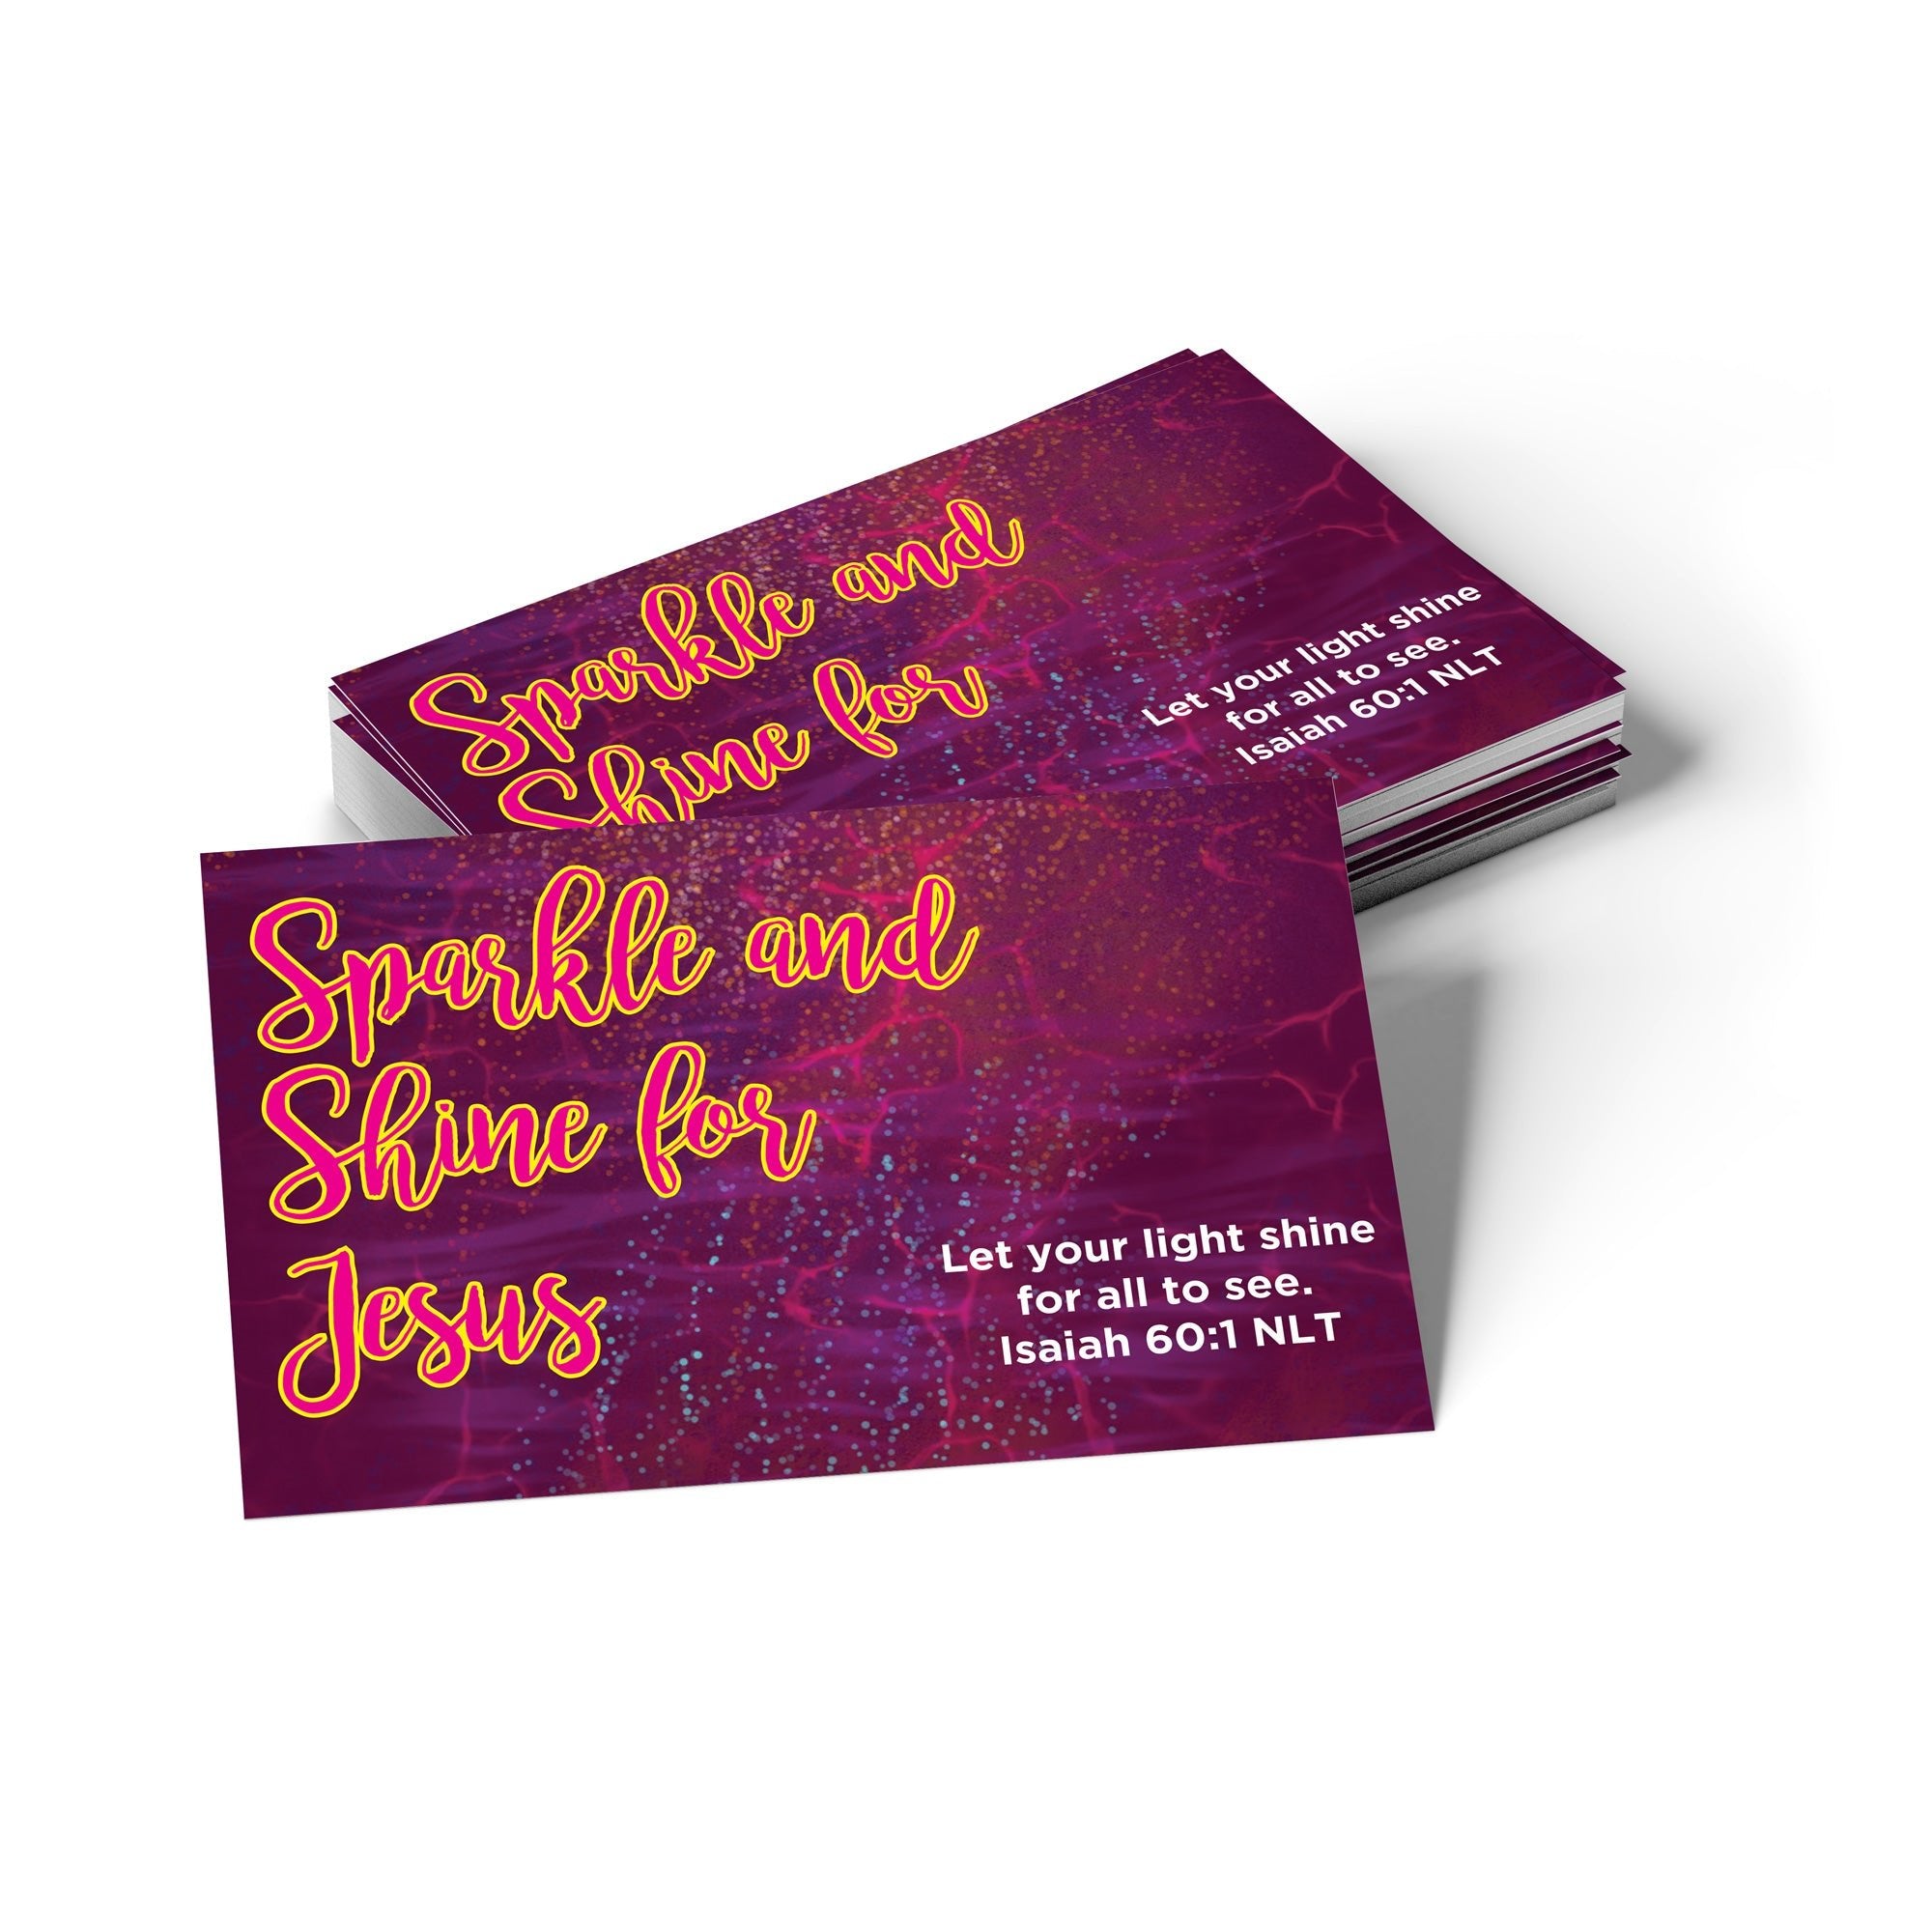 Children's Pass Along Scripture Cards - Sparkle and Shine for Jesus, Pack of 25